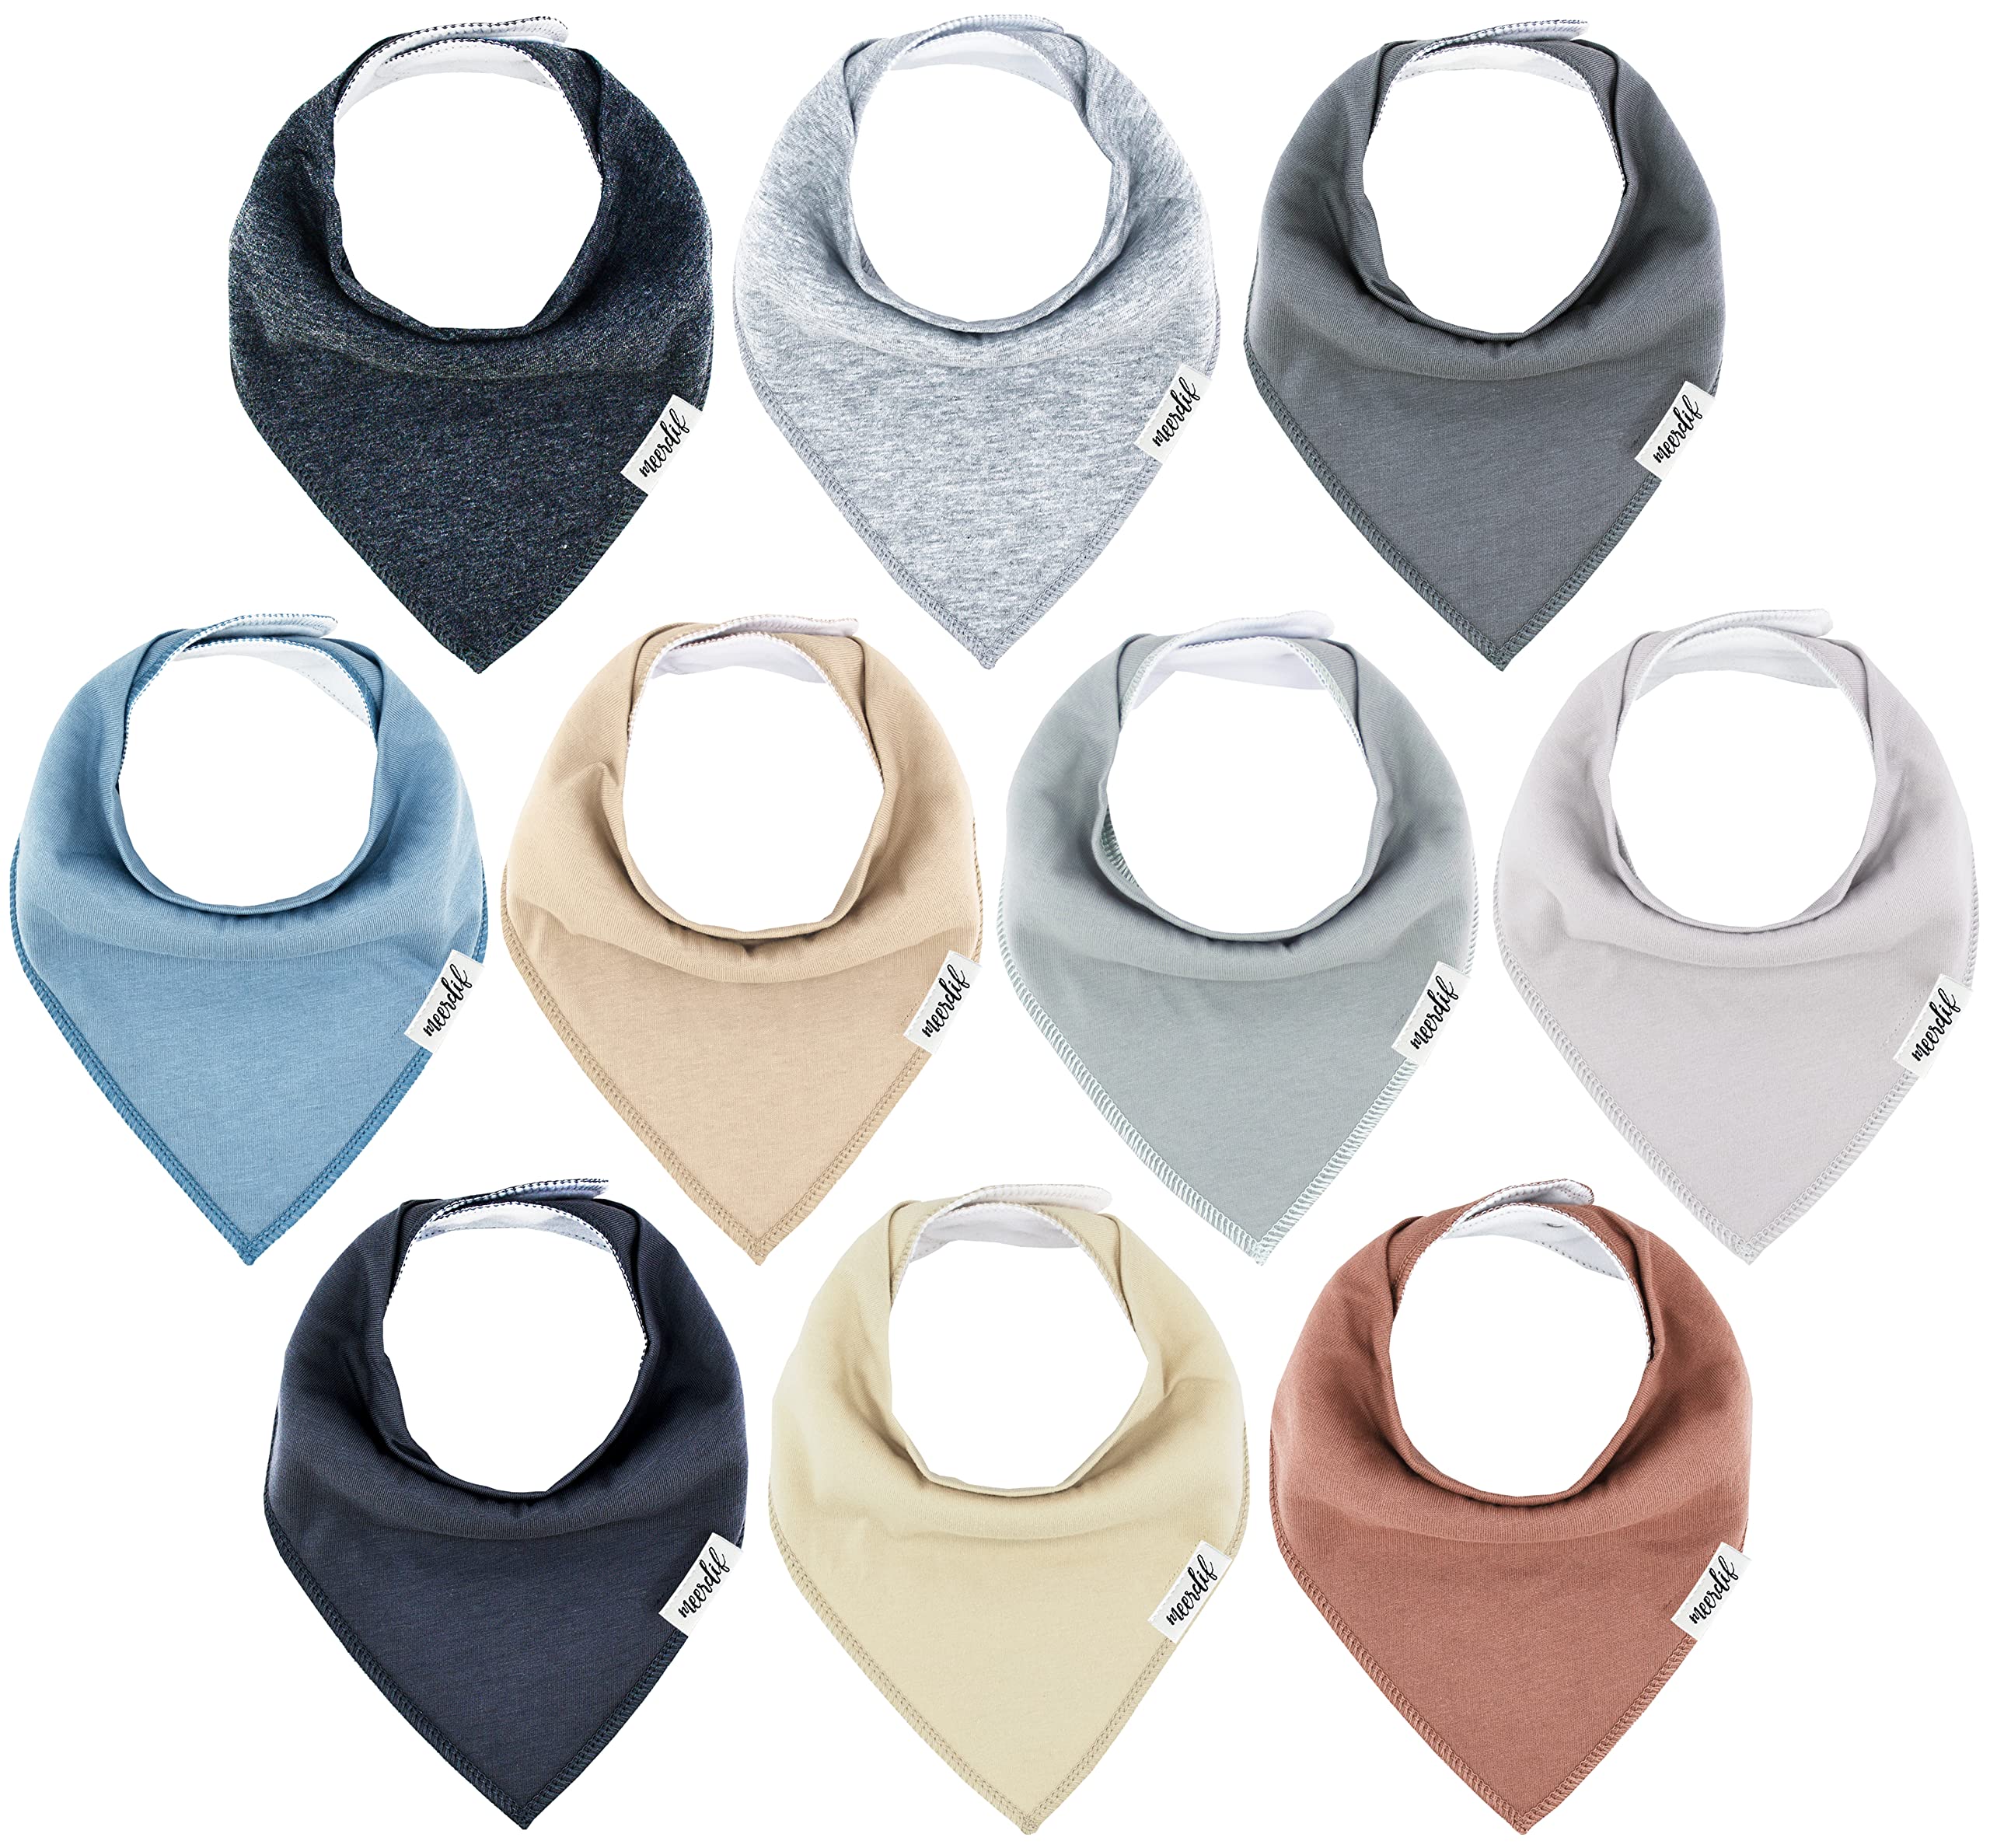 Meerdif 100% Organic Cotton Neutral Solid 10-Pack Baby Drool Bandana Bibs for Boys and Girls, Unisex Plain Colors for Teething and Drooling.